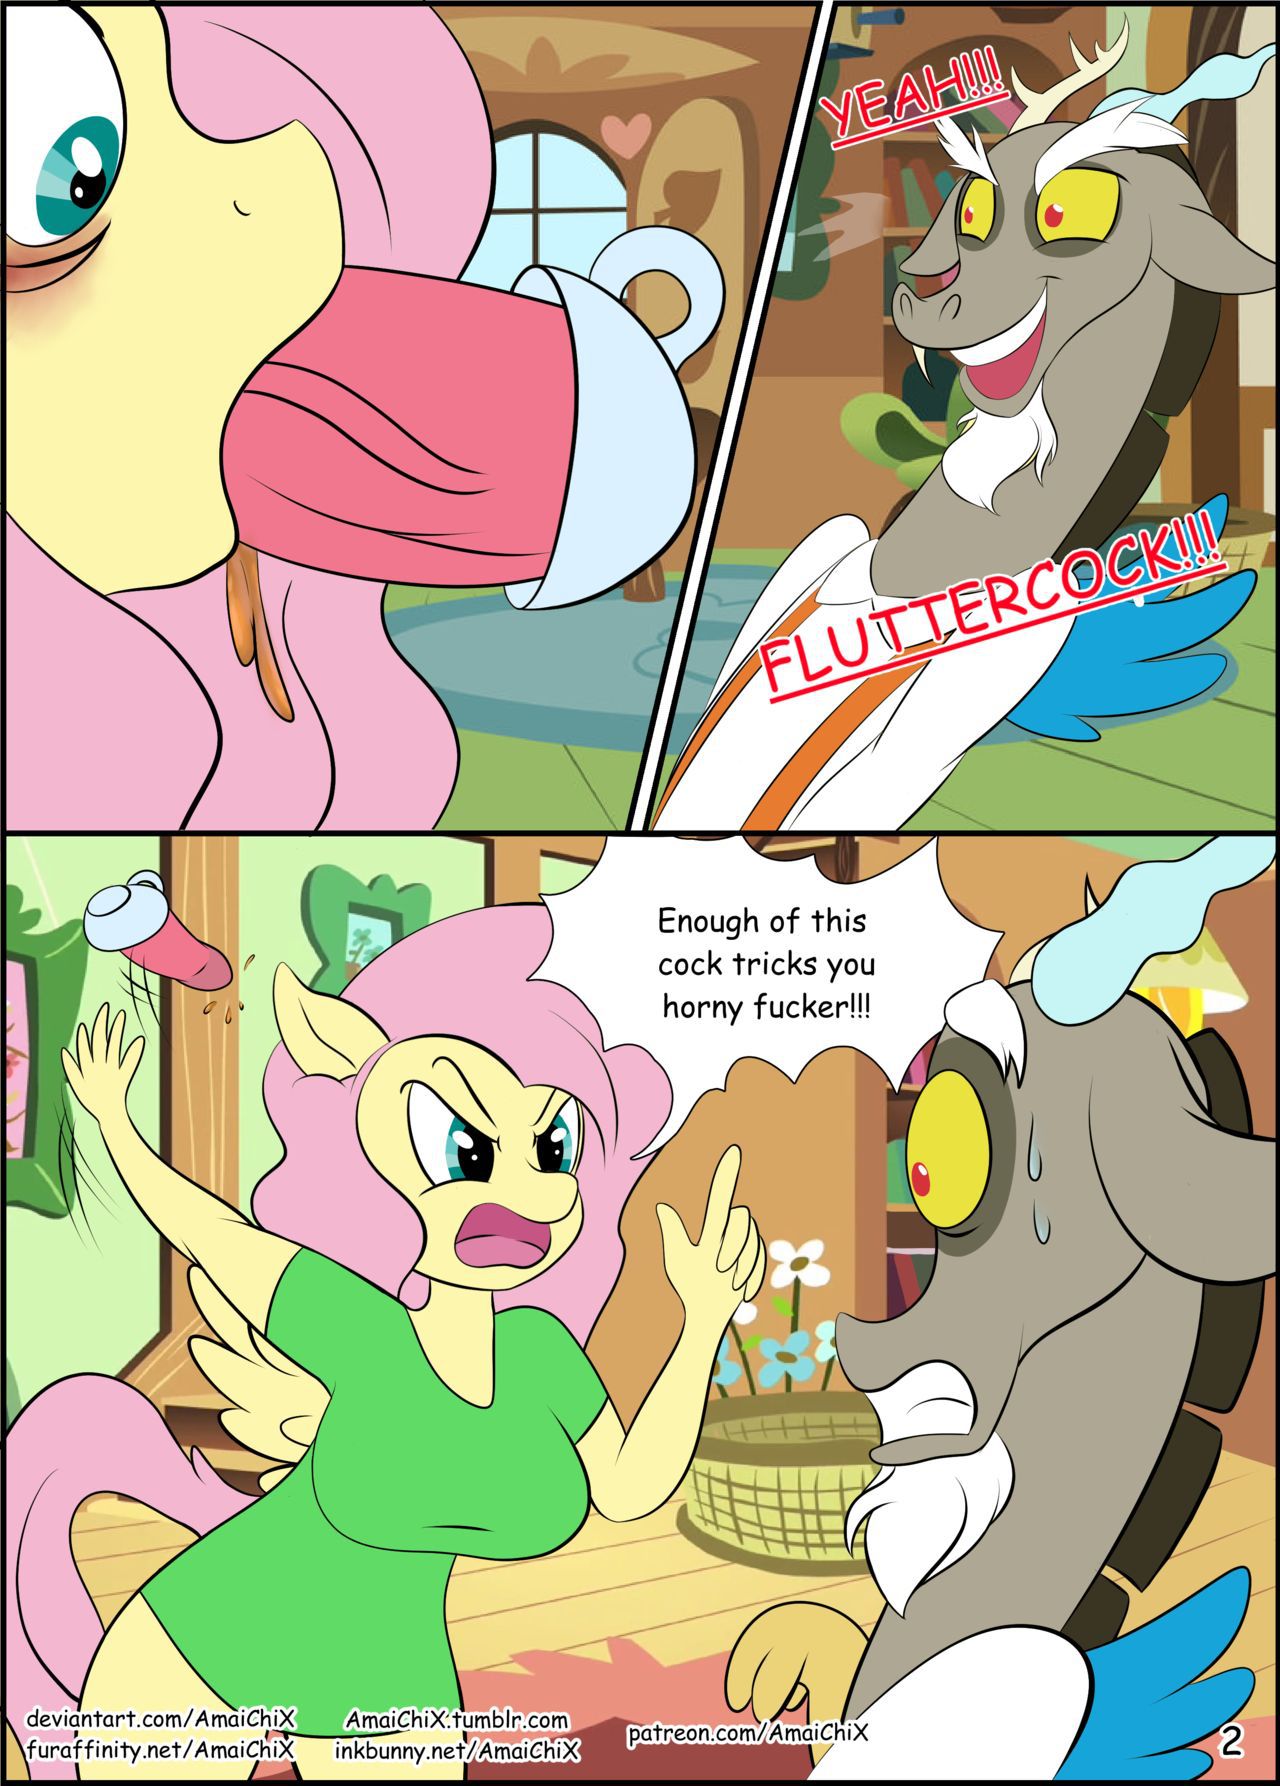 [AmaiChiX] Teat Party (My Little Pony Friendship Is Magic) [Ongoing] 3